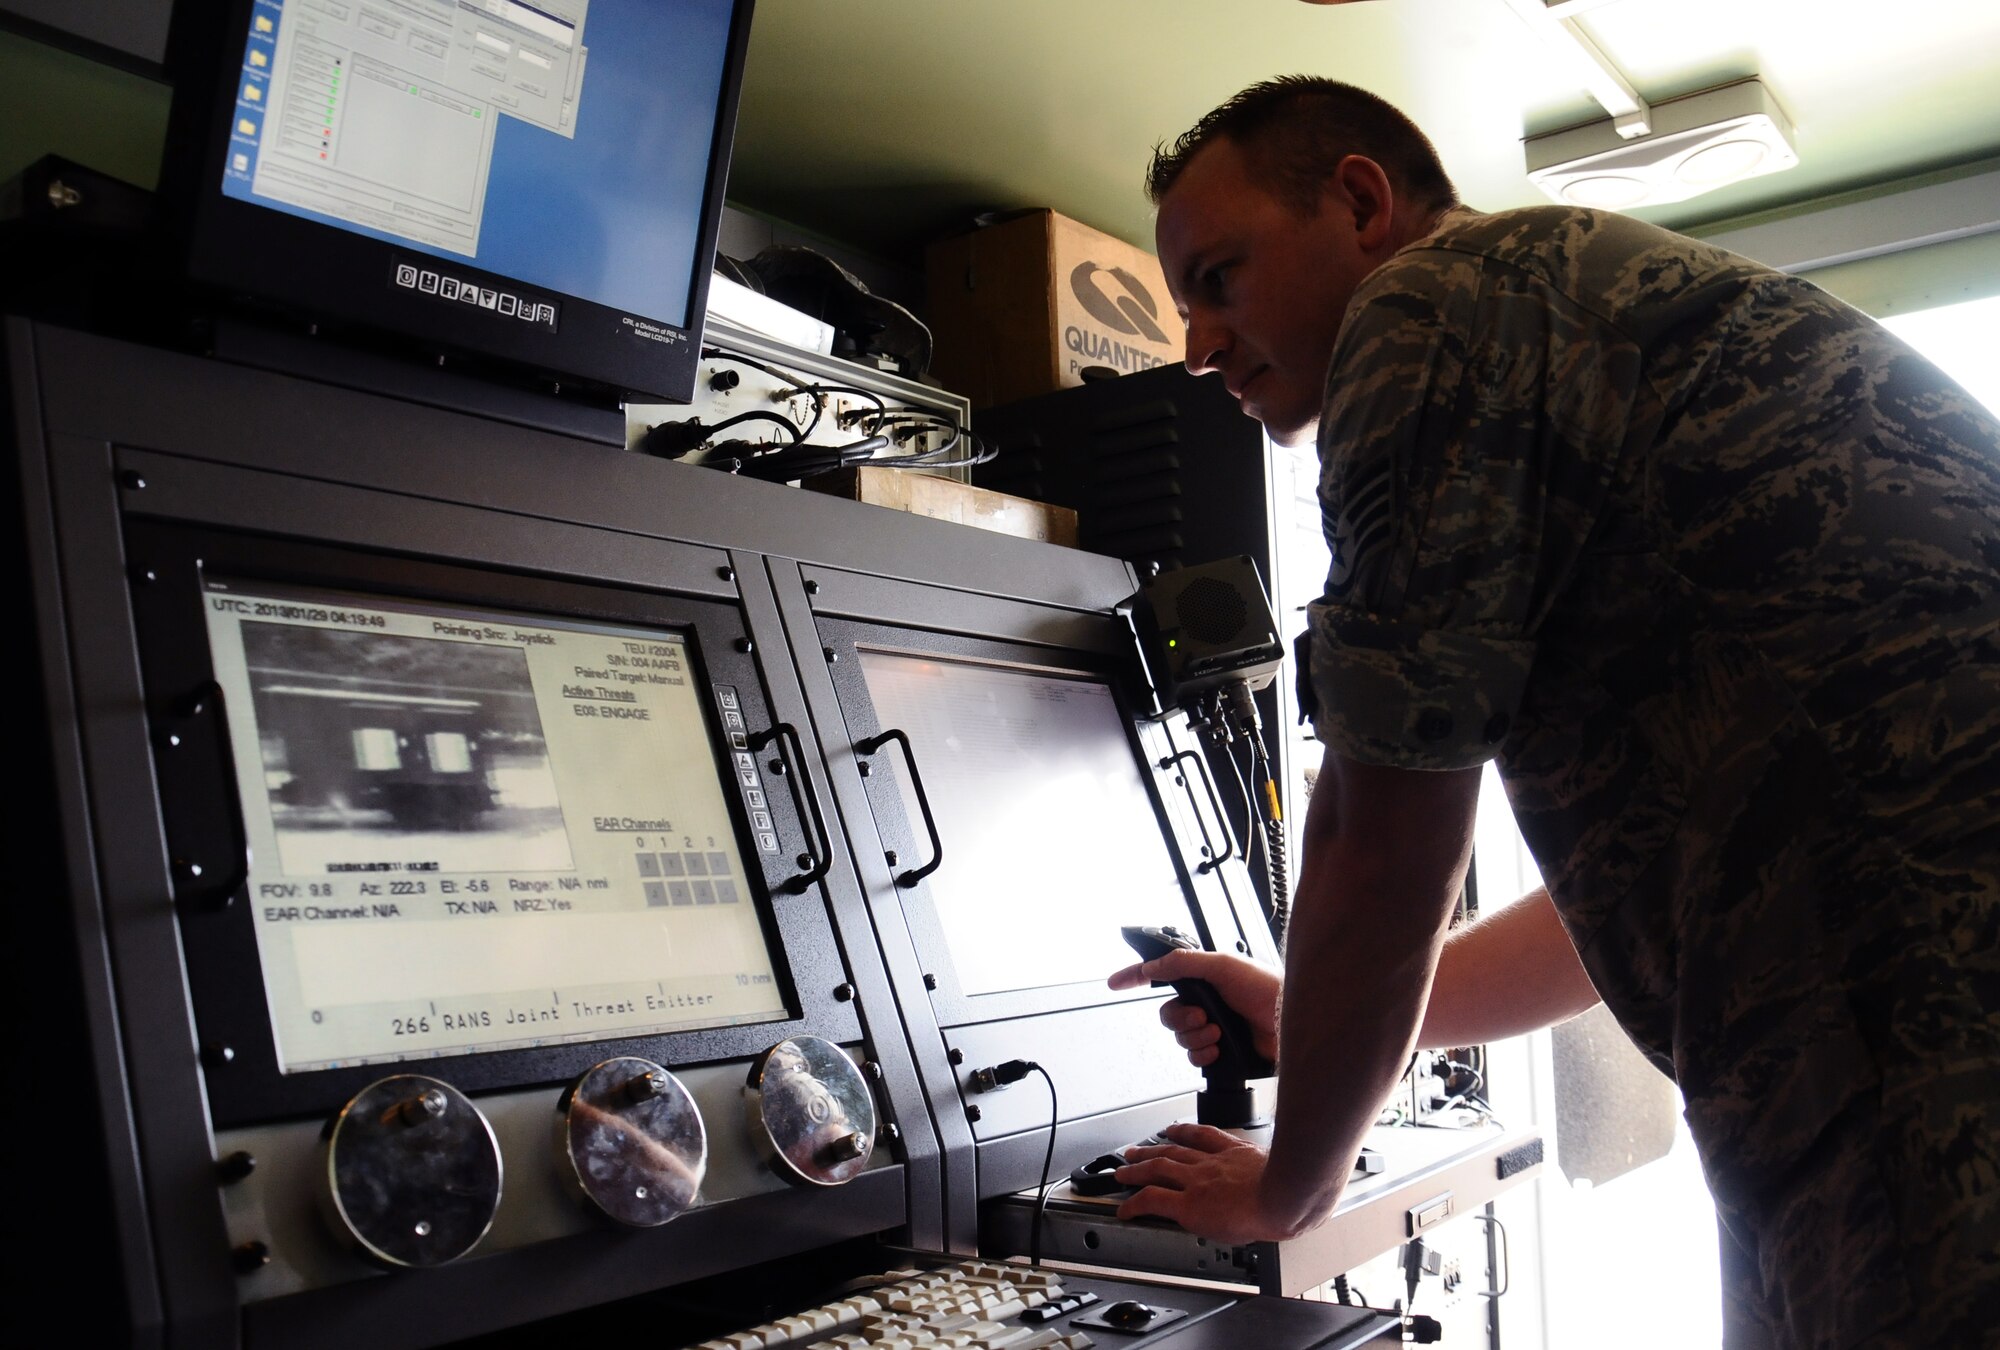 Staff Sgt. Rick Woltkamp, 266th Range Squadron ground radar systems craftsman with the Idaho Air National Guard, works with the Joint Threat Emitter at Ritidian Point on Northwest Field, Guam, Jan. 29, 2013. The Air Force and Navy radar and satellite systems, known as the JTE, provide ground threat warnings up to the aircraft to simulate an attack, improving Andersen’s operational readiness. (U.S. Air Force photo by Airman 1st Class Mariah Haddenham/Released)